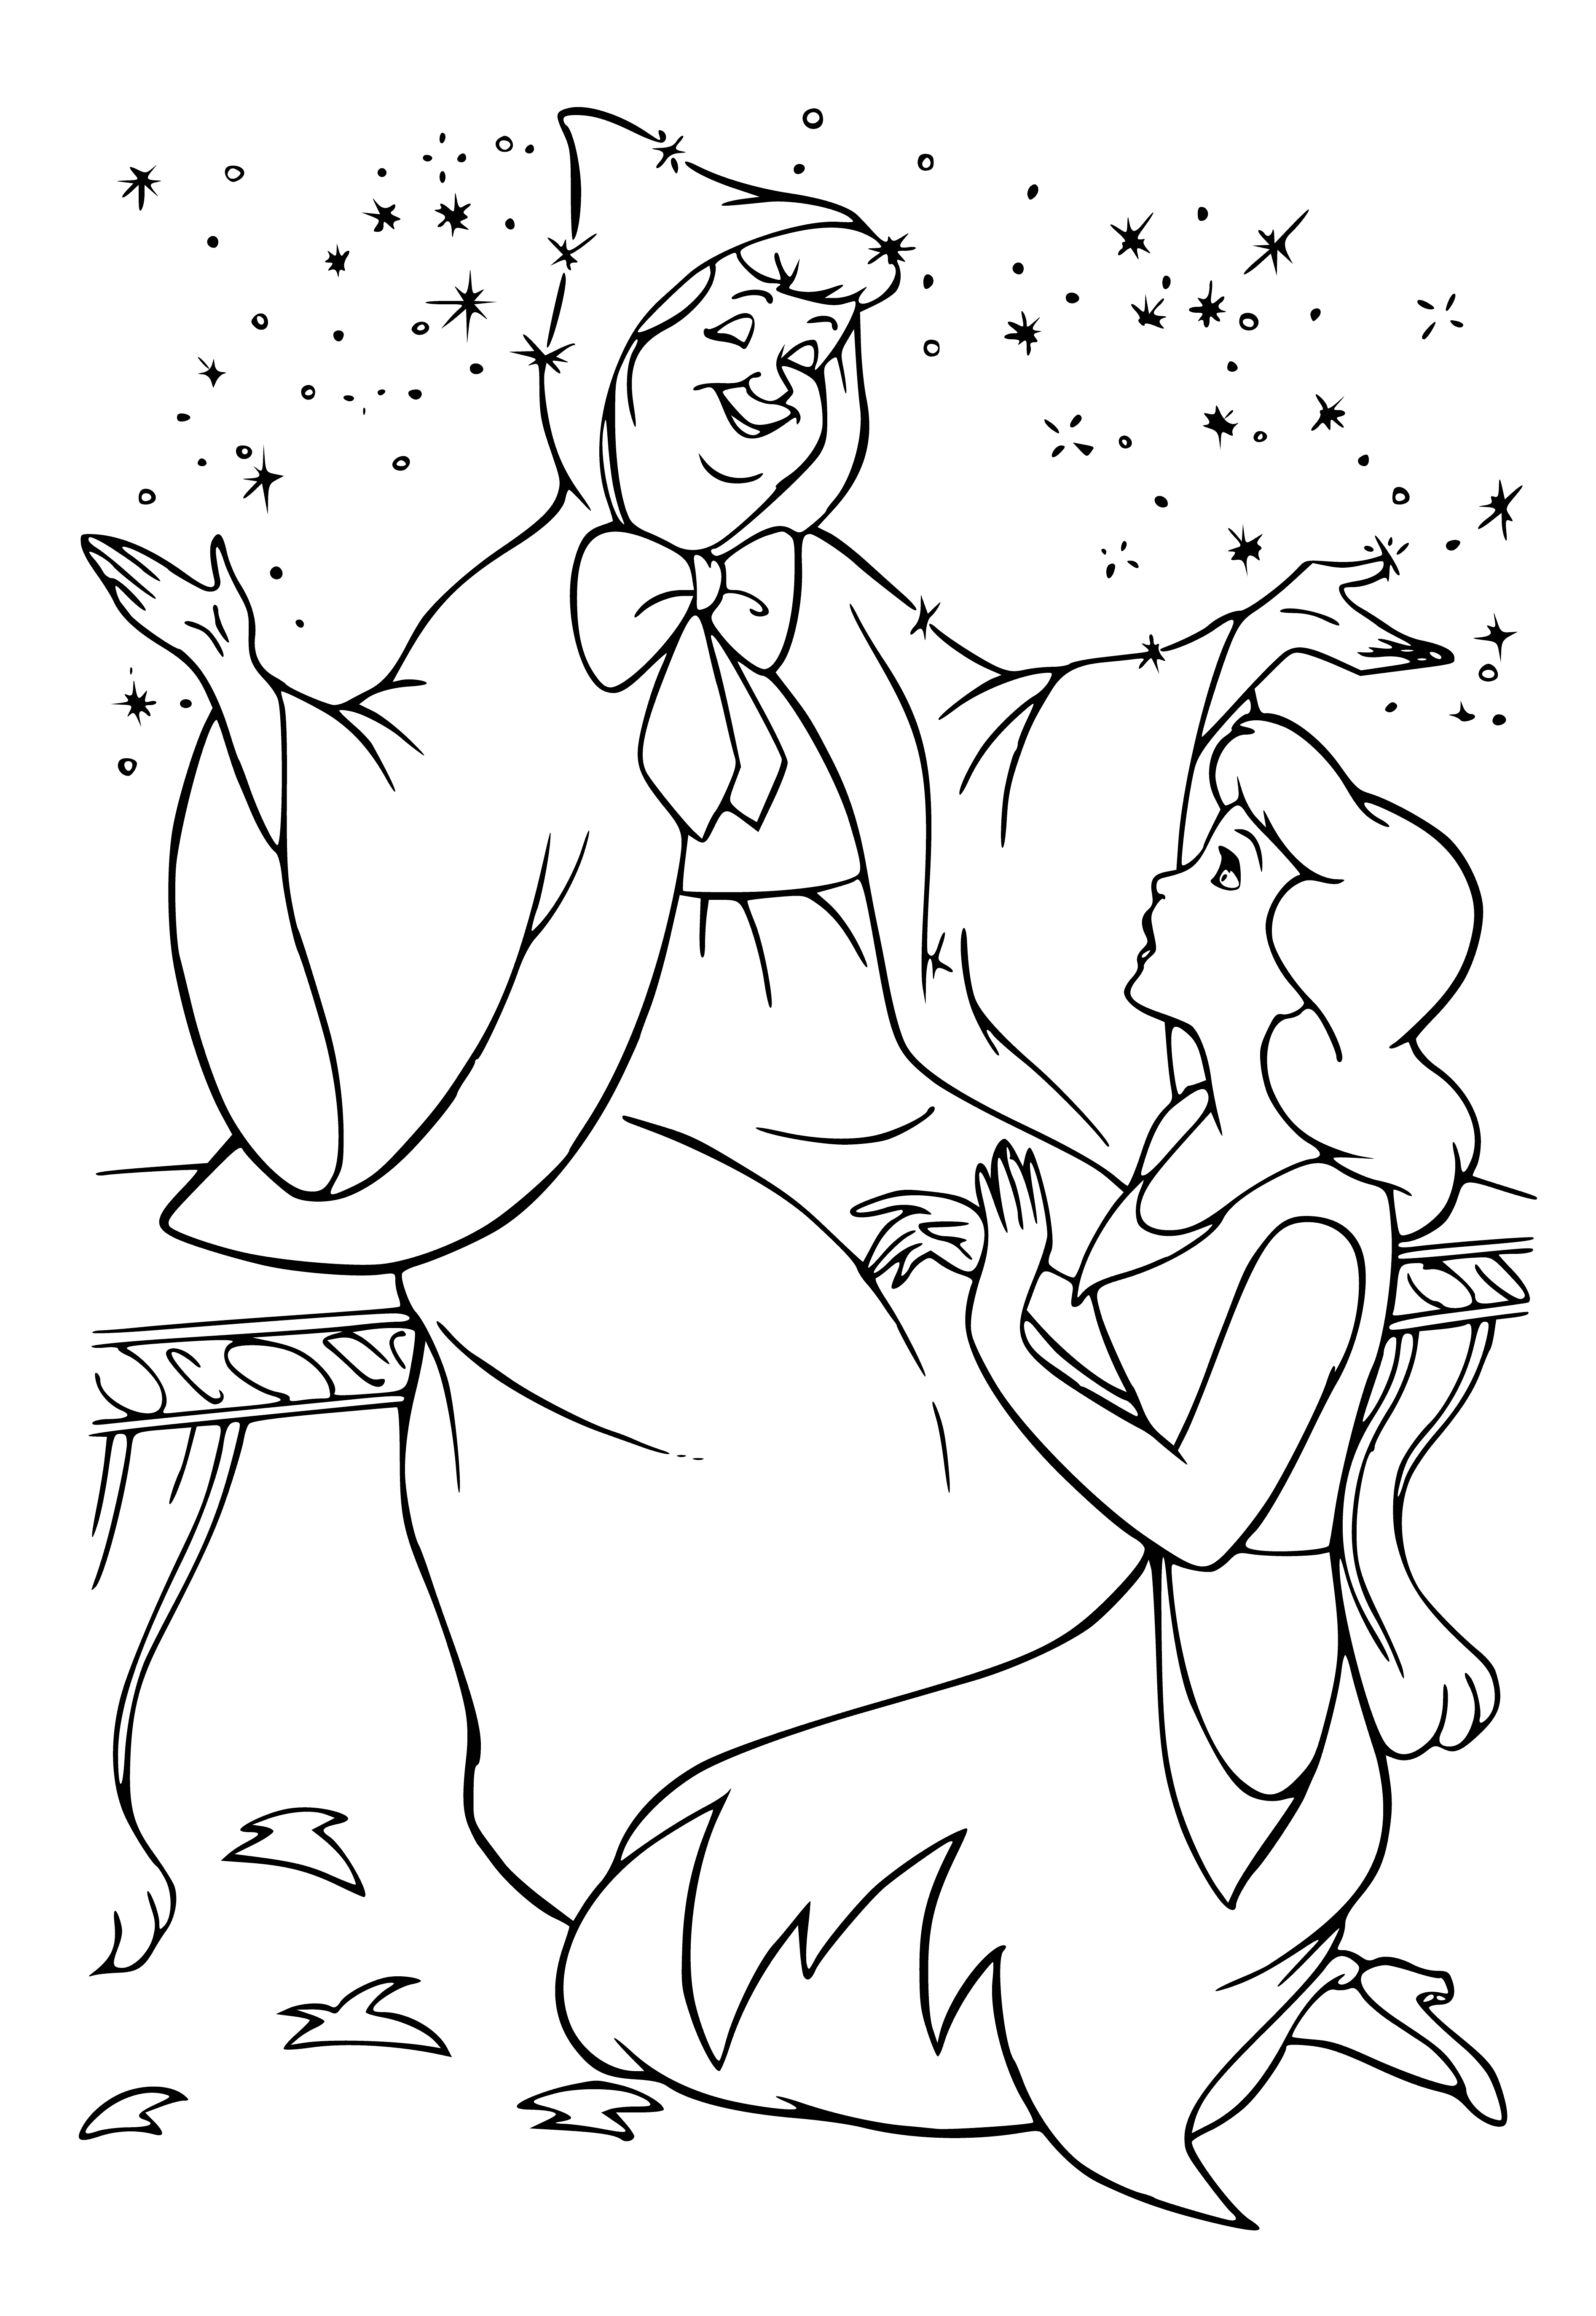 coloring page: Fairy godmother has light blue dress, purple cape w/hood, light brown hair, blue eyes, wings & magic wand. #fairytales